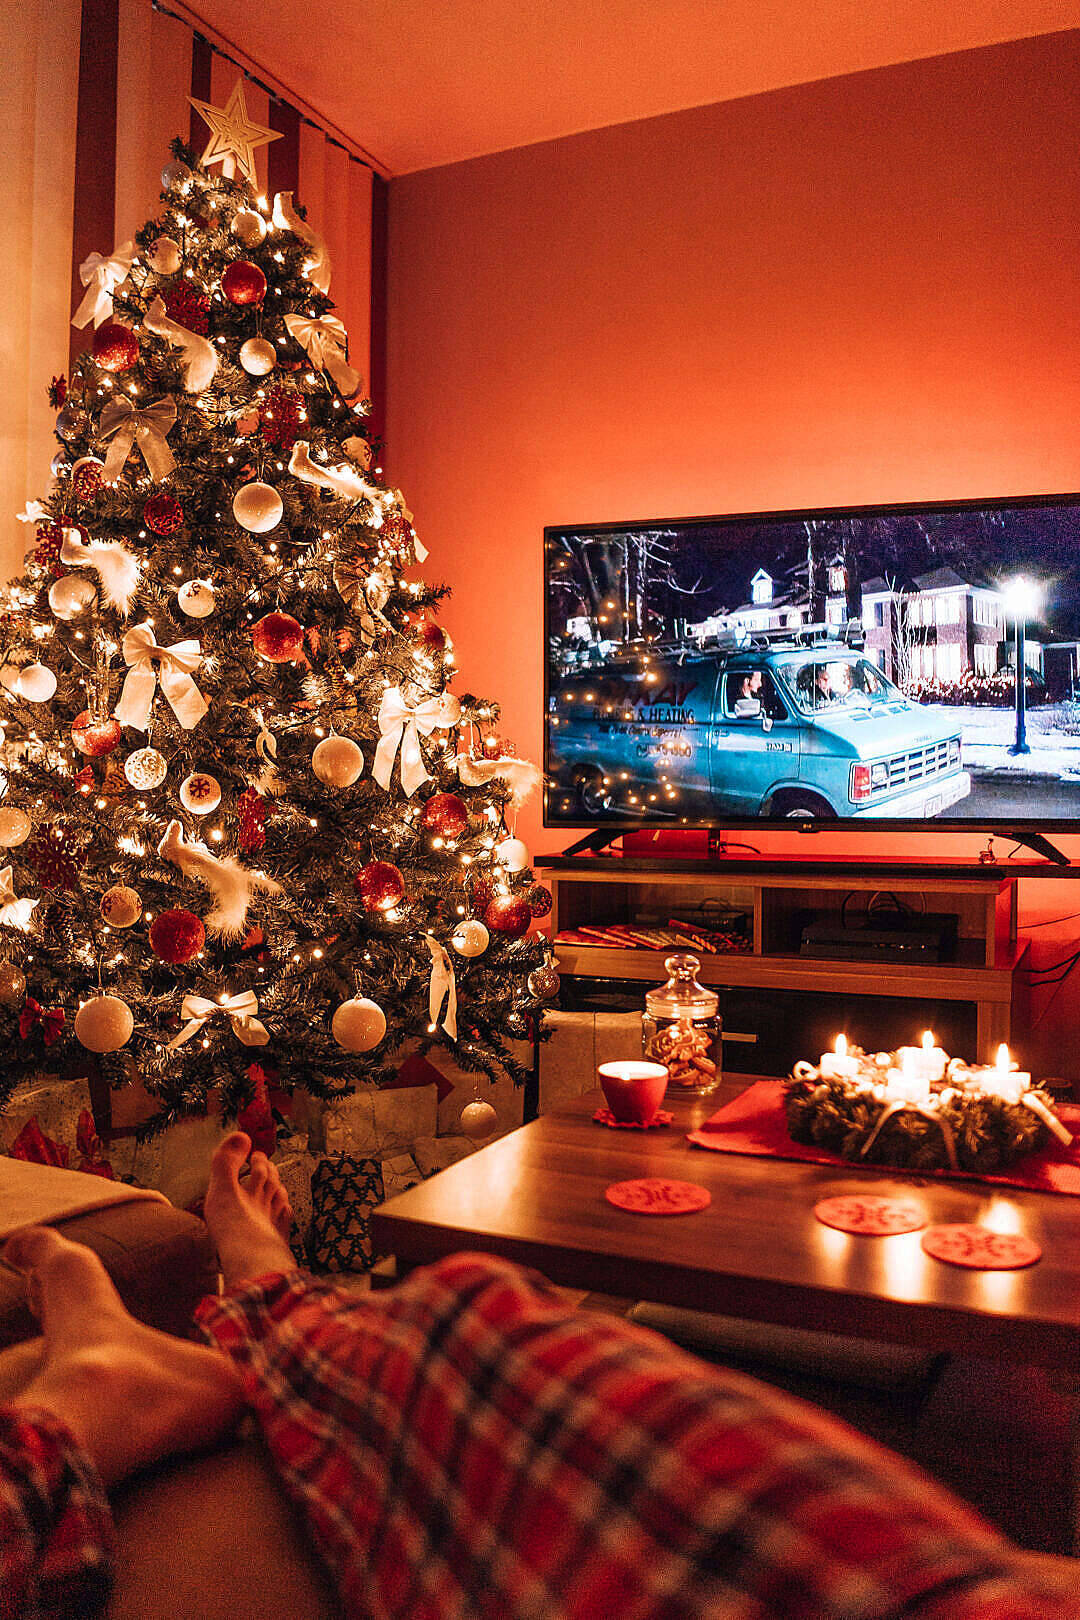 https://wallpapers.com/images/hd/living-room-with-pretty-christmas-decorations-go494x6jbhviinzt.jpg